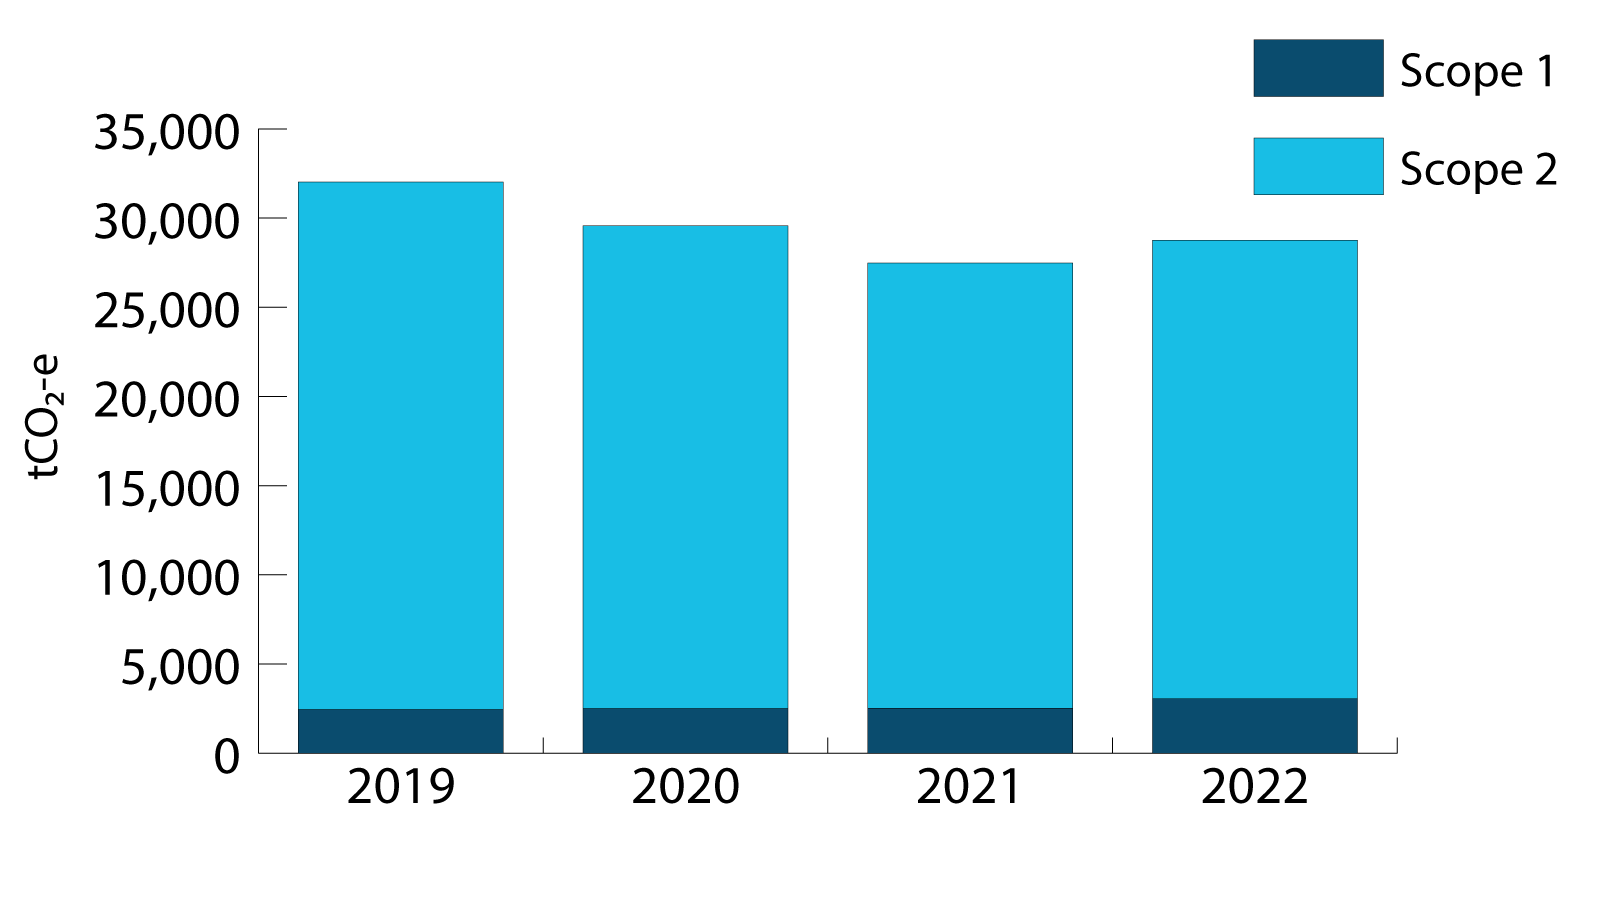 Yearly greenhouse gas emissions  for scope 1 and 2 for 2019 to 2022